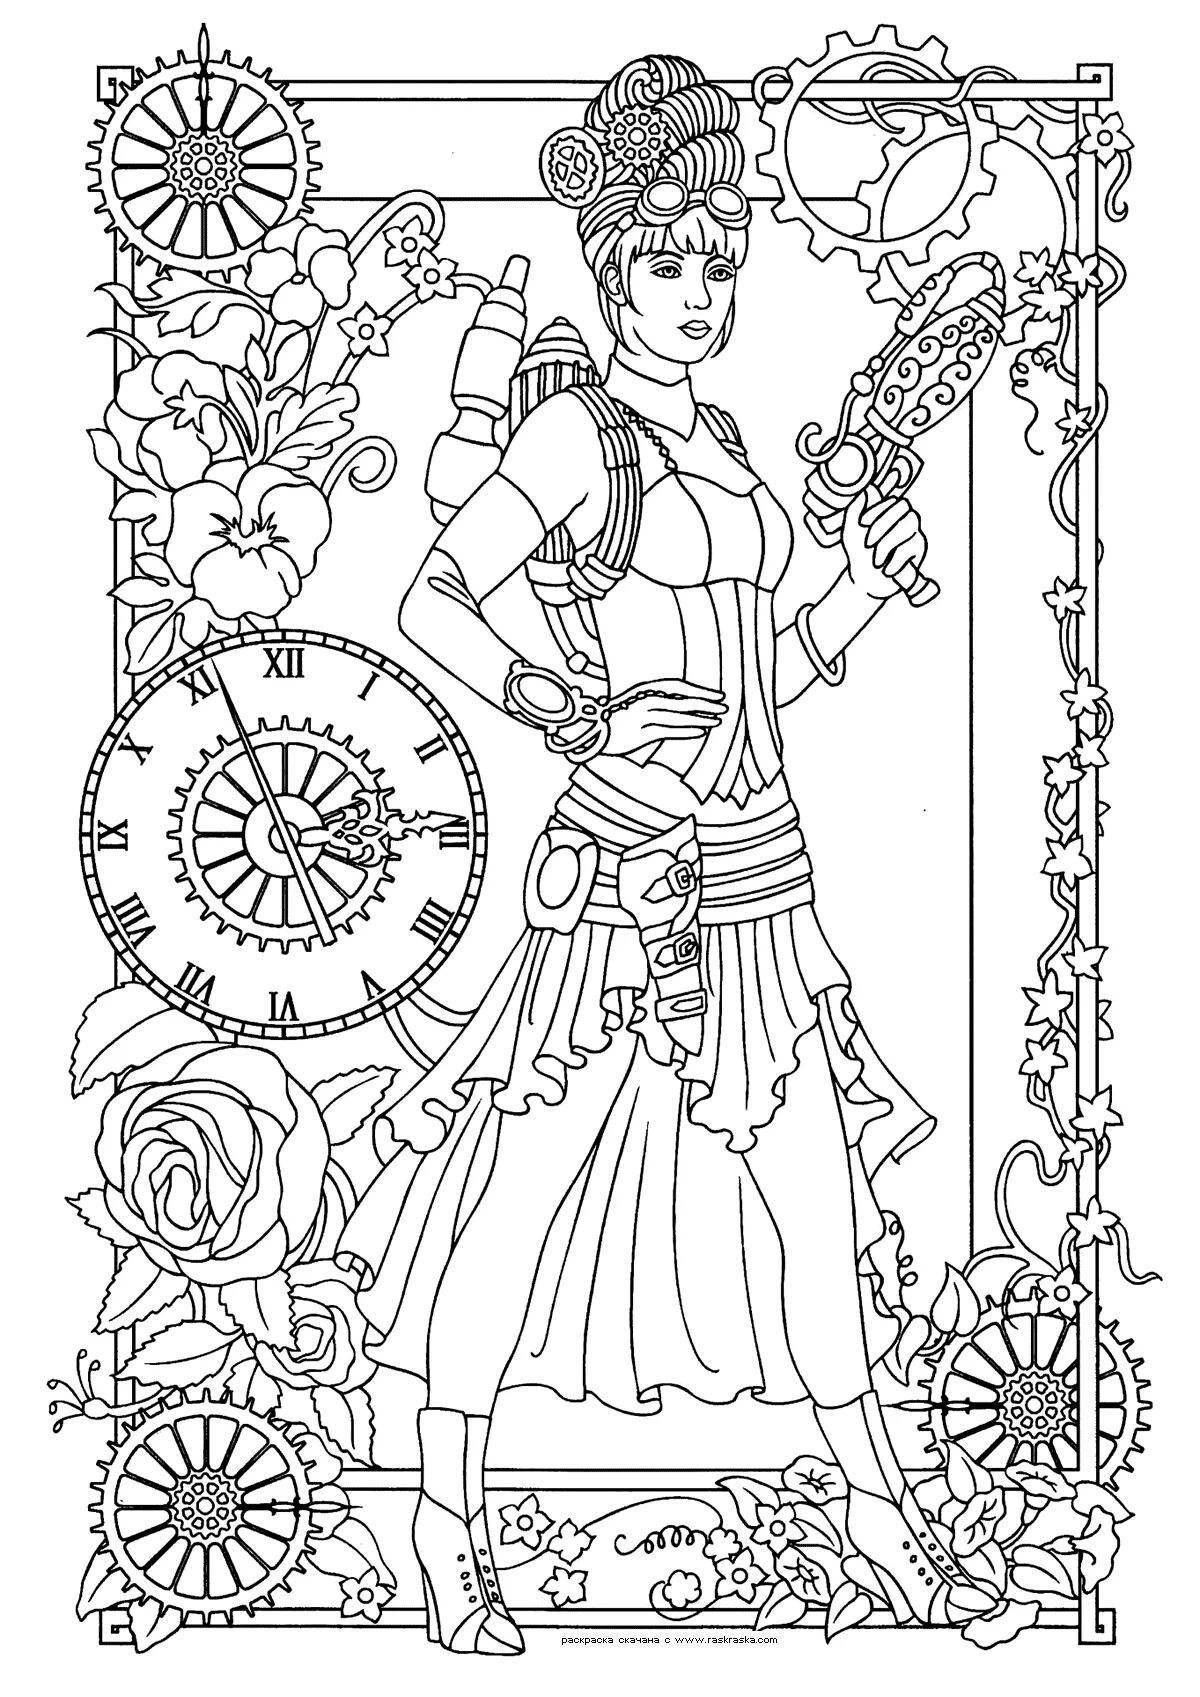 Detailed steampunk coloring book